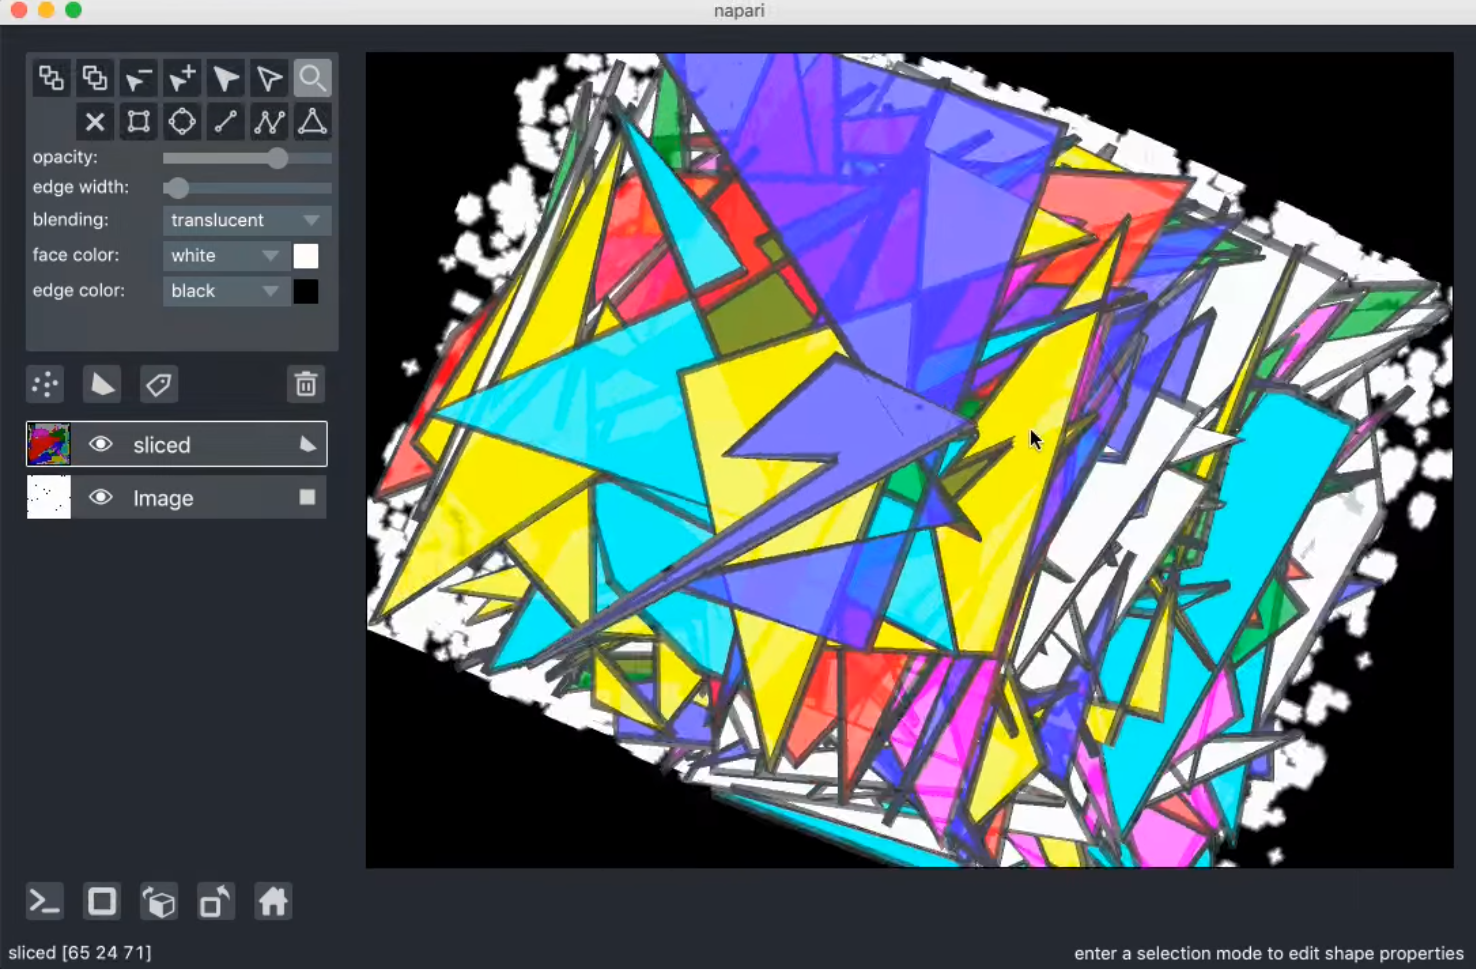 A stack of colorful polygon shapes over an image layer. The view alternates between 2D and 3D views of the data.